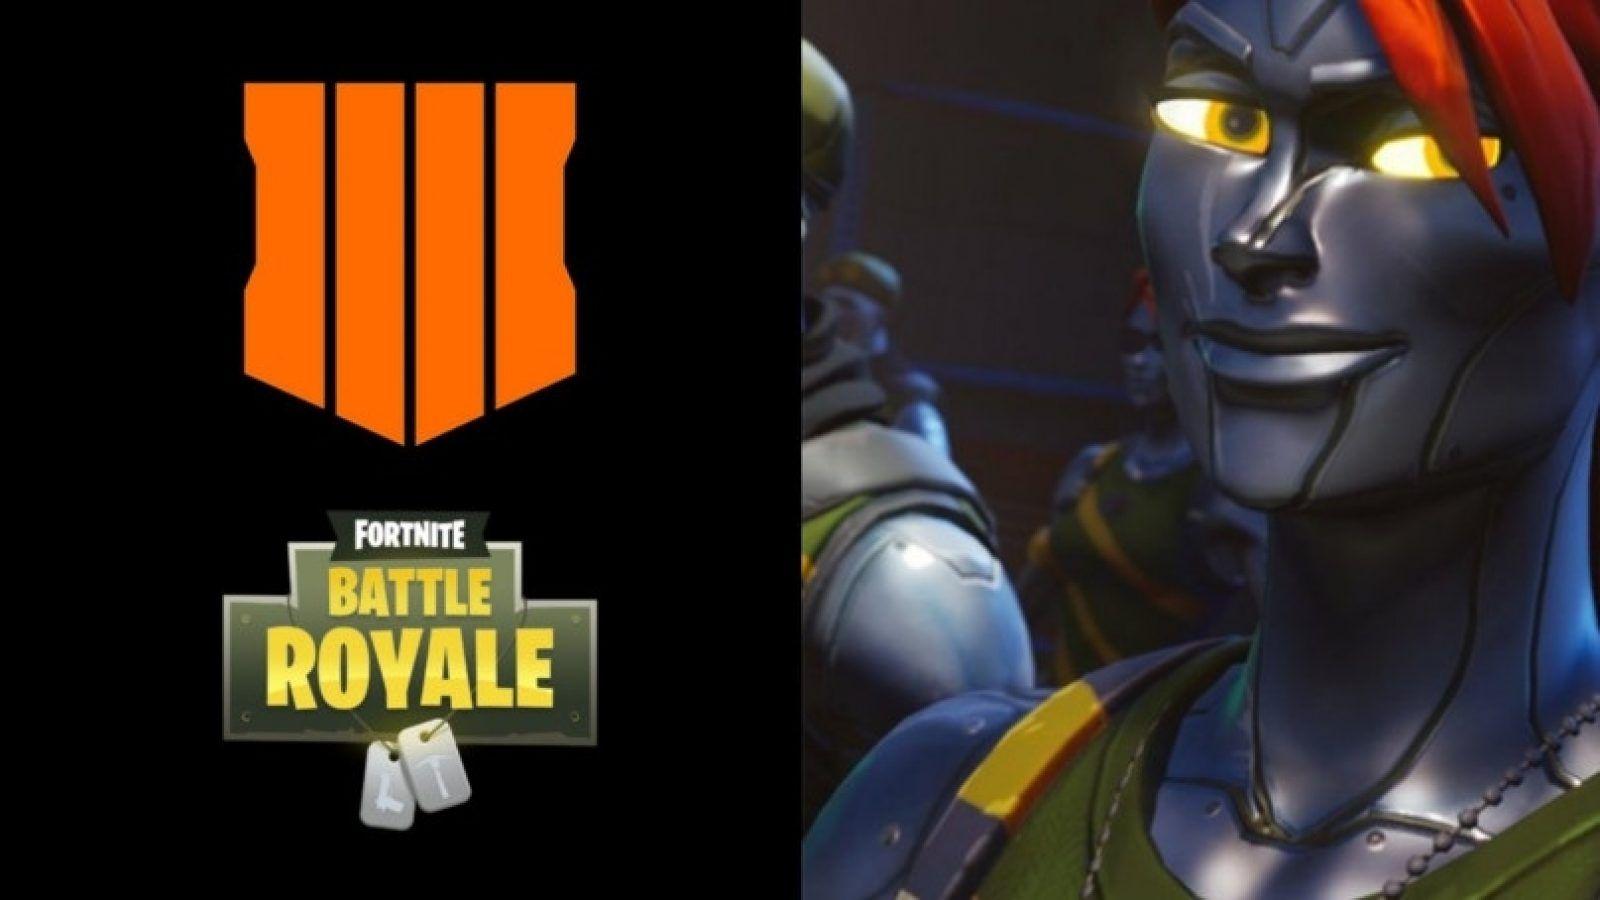 Latest Image Tweeted By Fortnite Contains a Potential Teaser for CoD